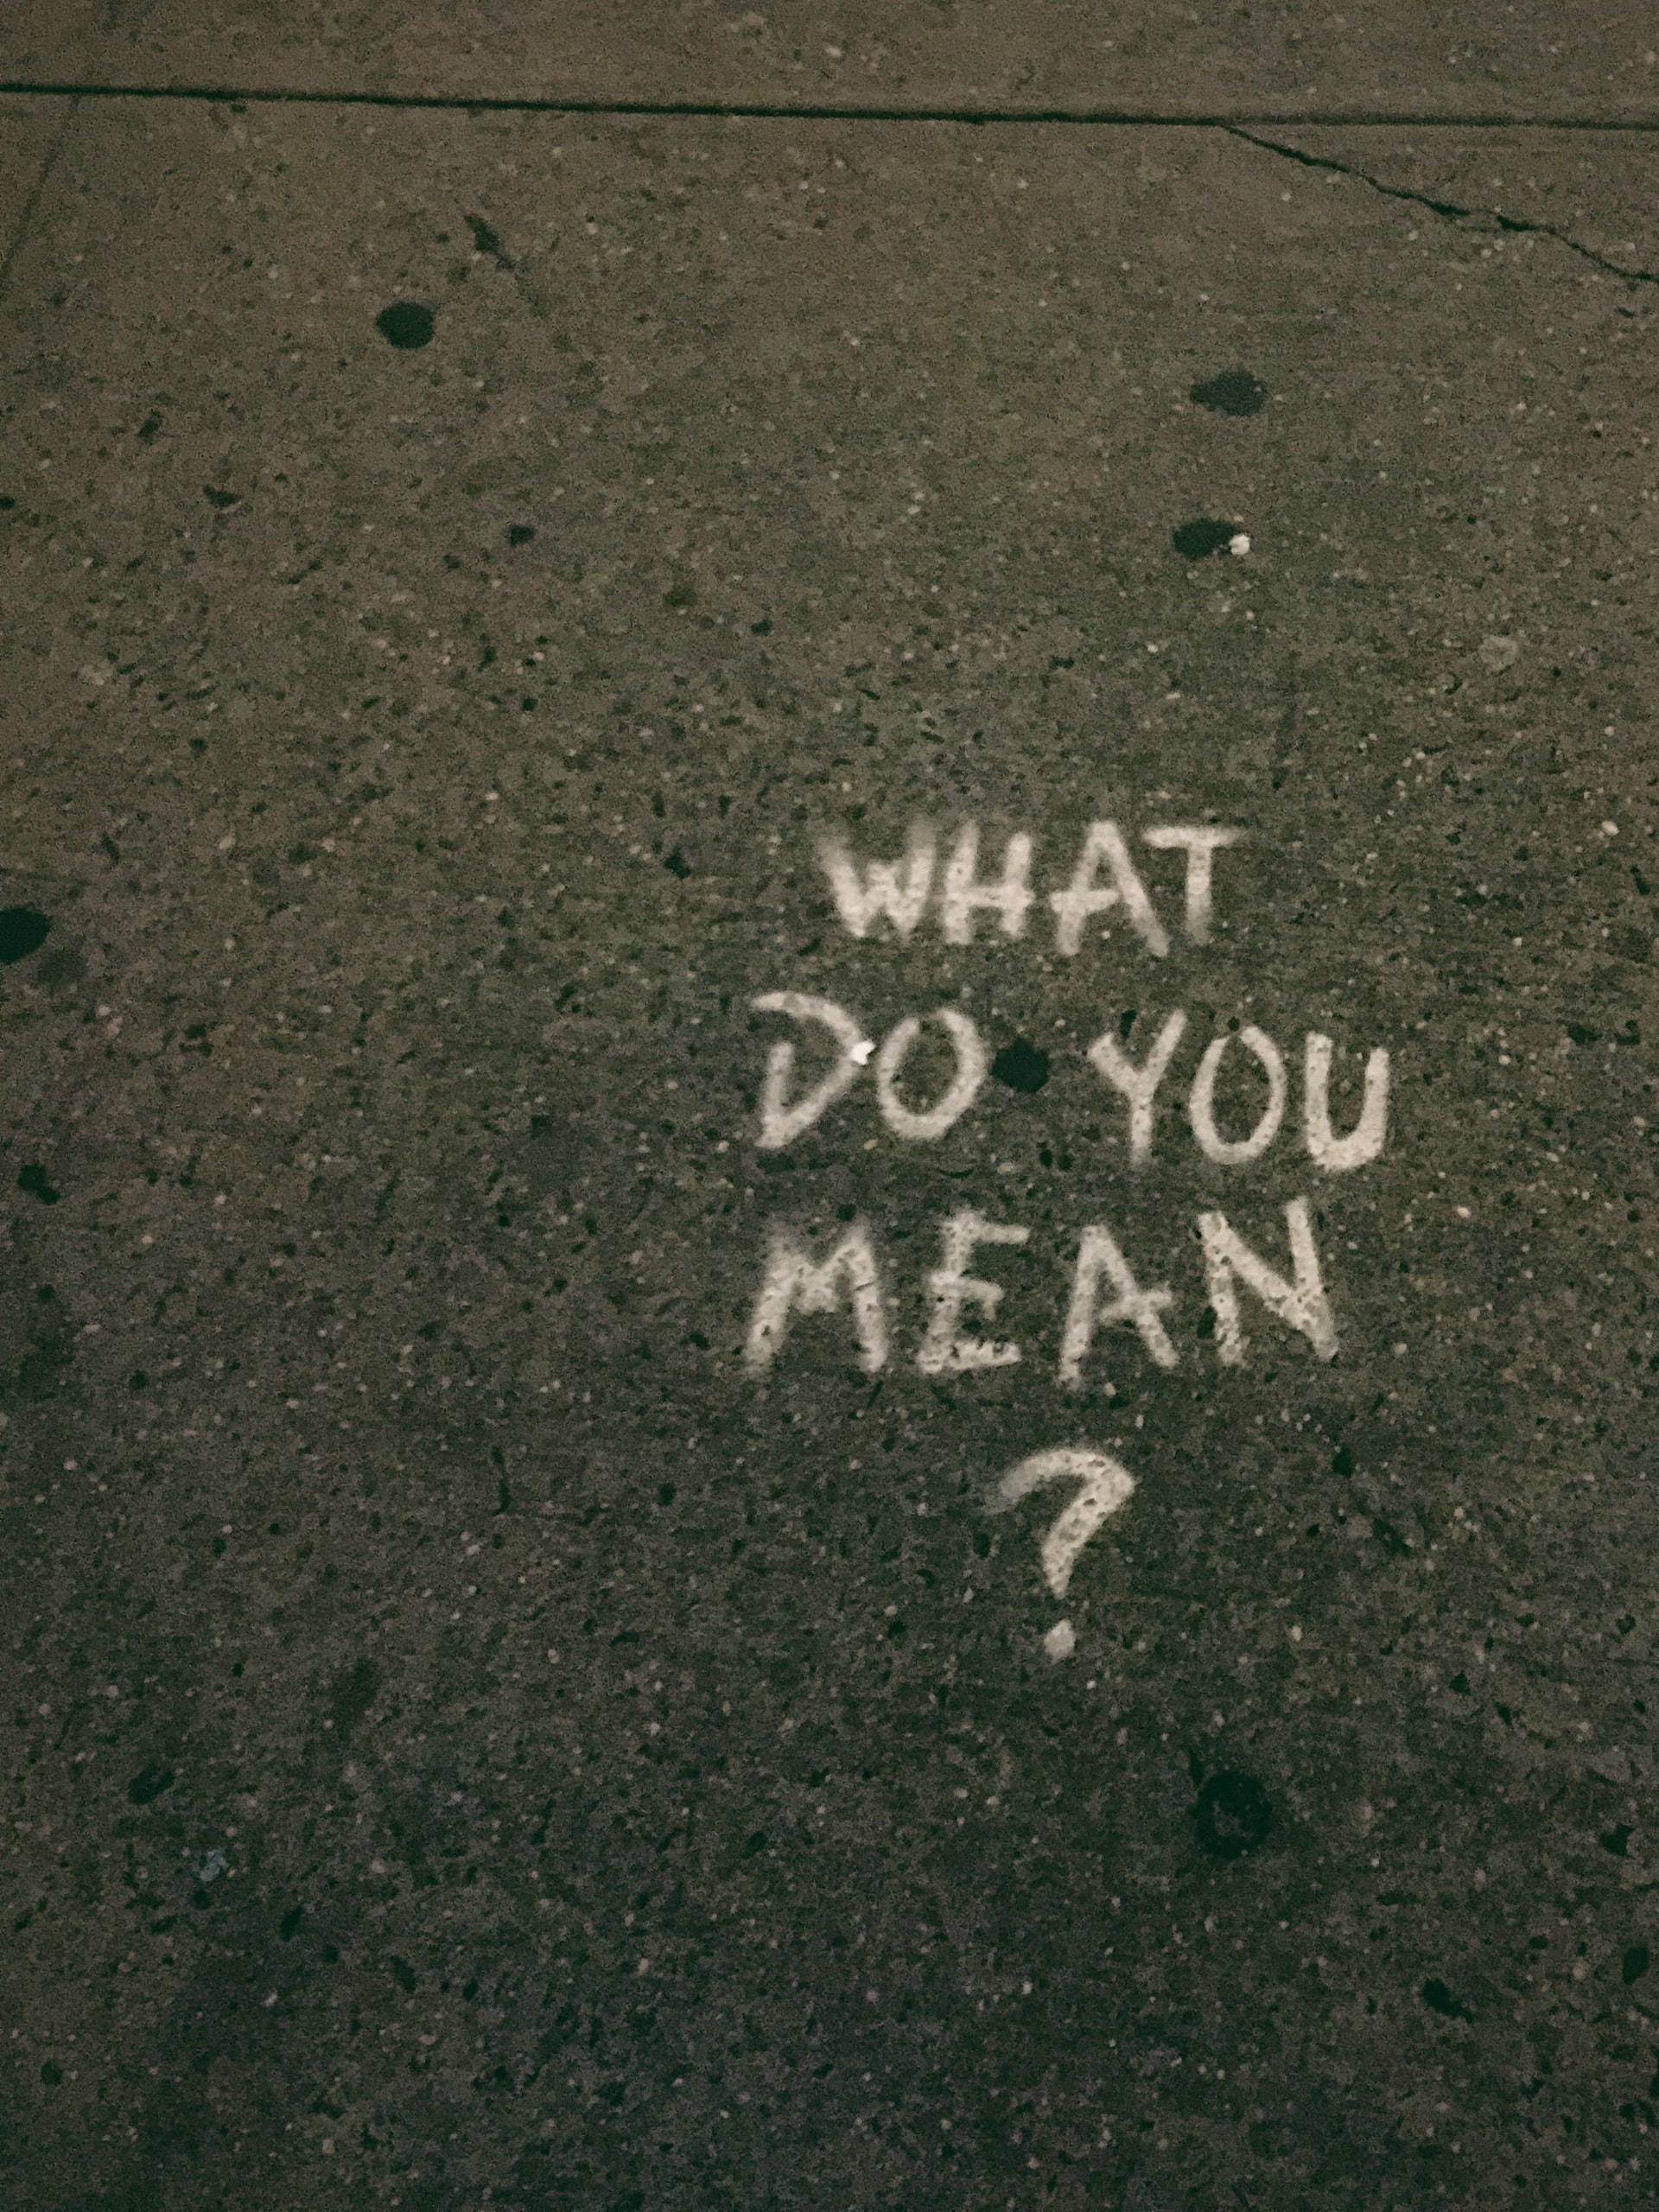 The words "What do you mean?" written in chalk on pavement.